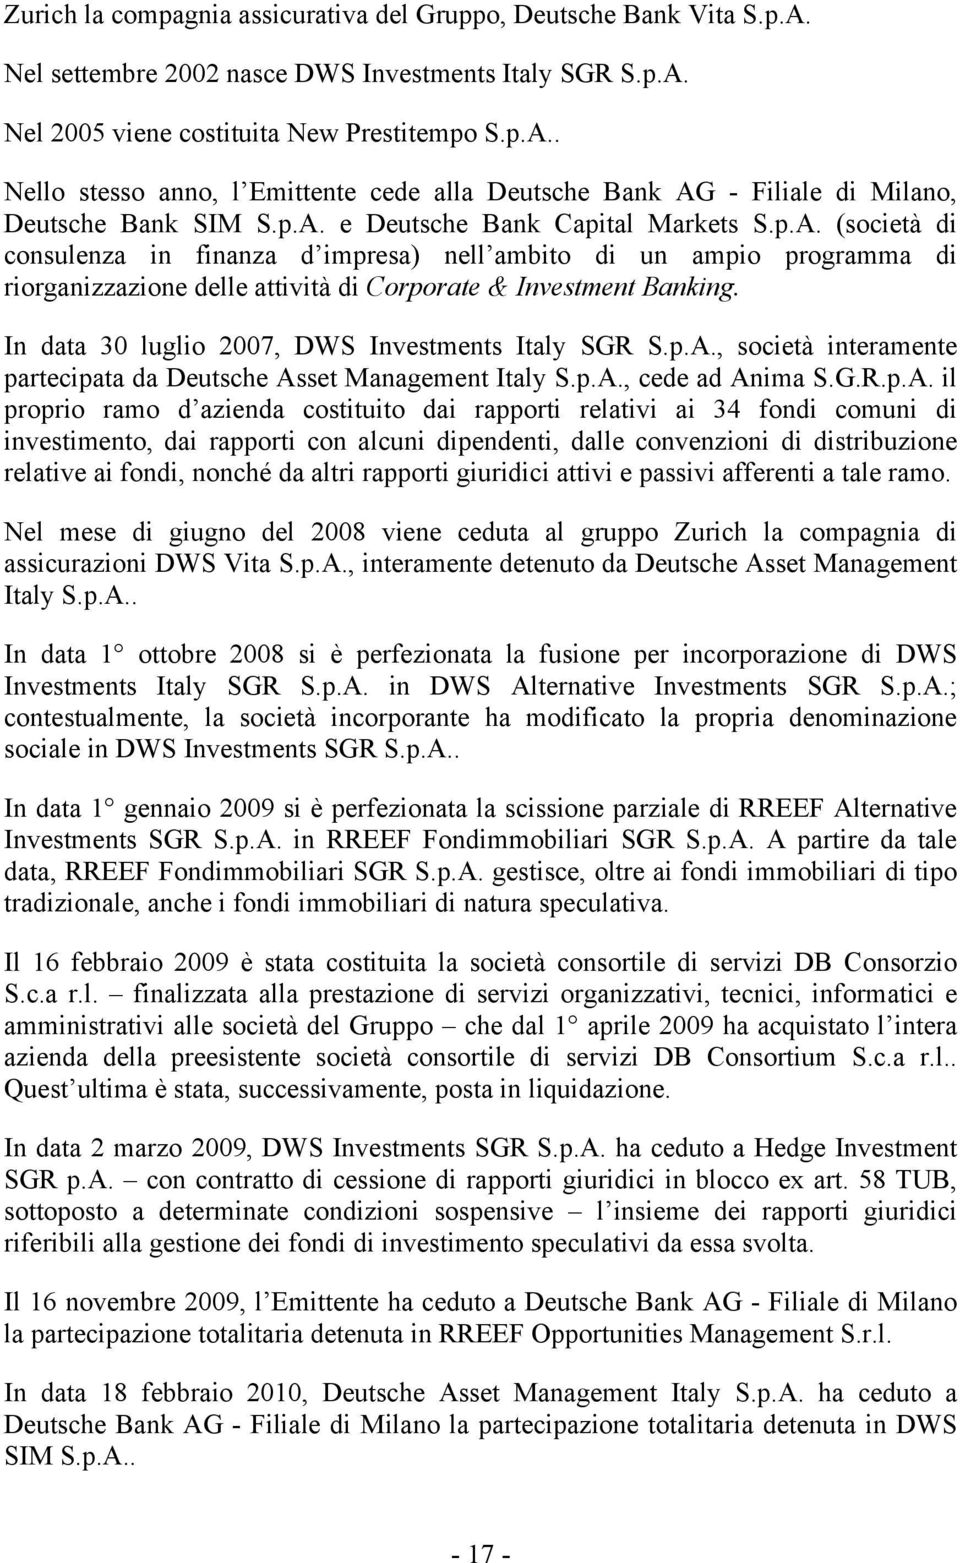 In data 30 luglio 2007, DWS Investments Italy SGR S.p.A.